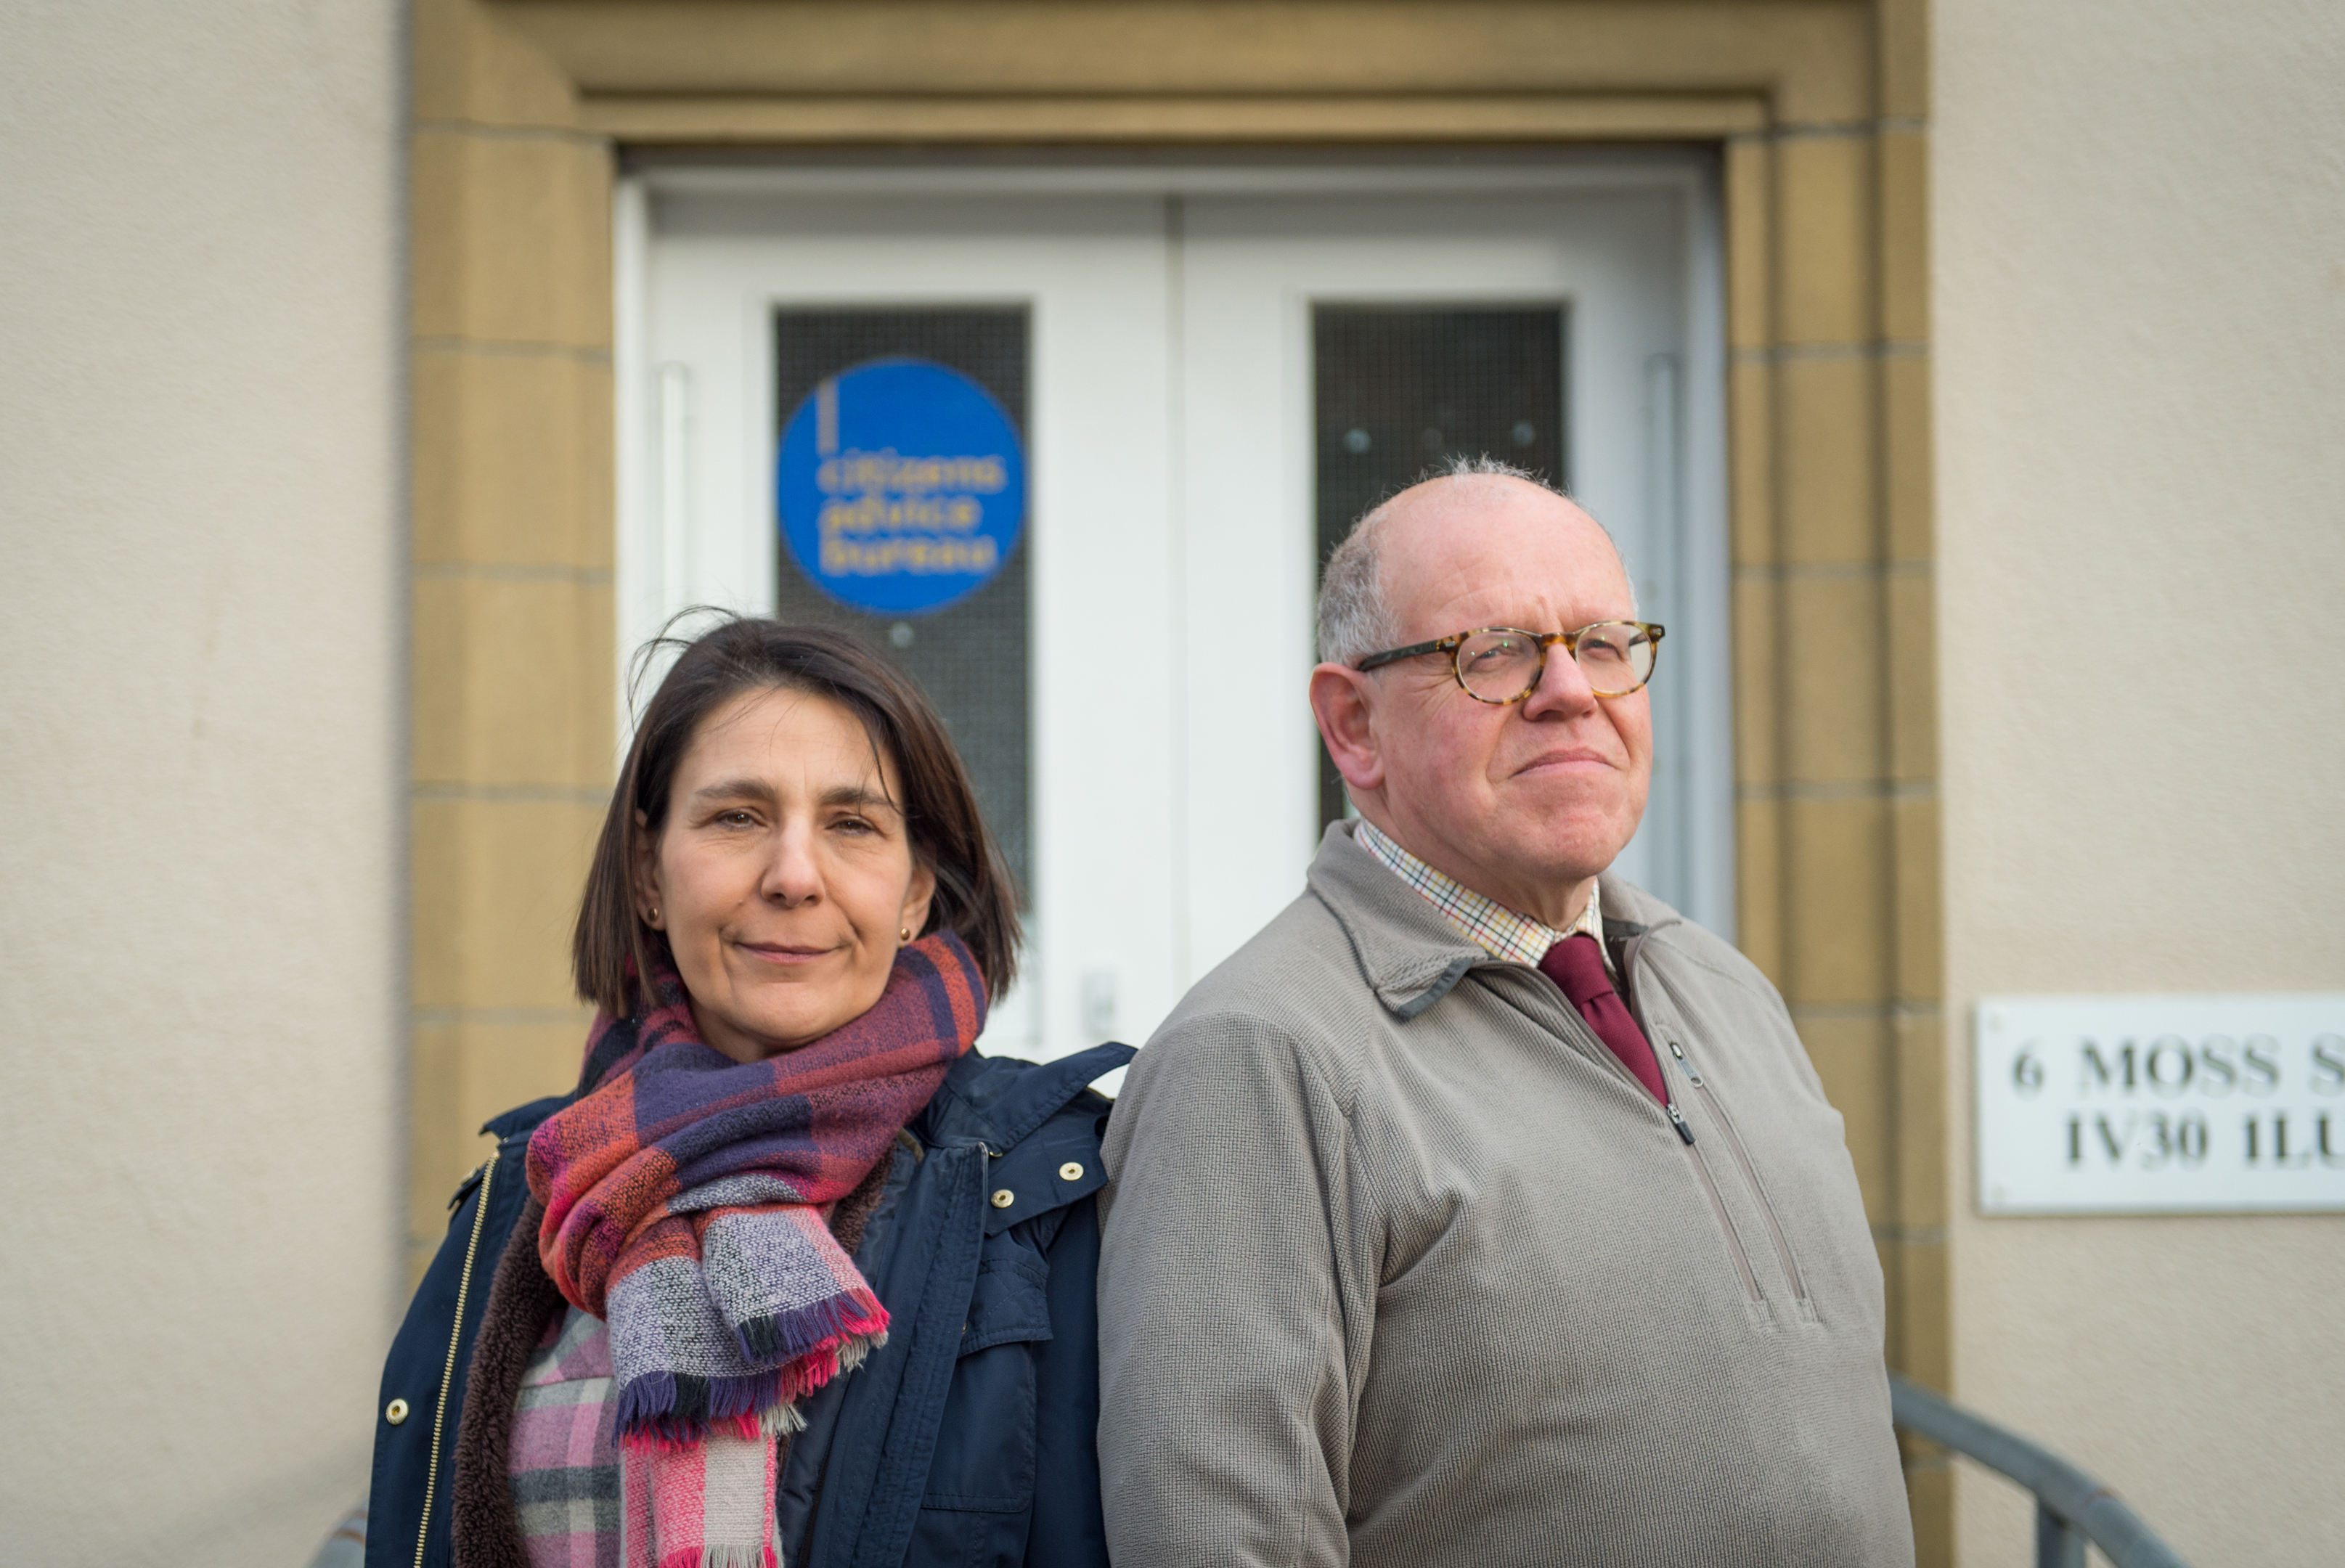 Moray Citzens Advice Bureau manager, Mary Riley, and volunteer James Workman outside the group's offices on Moss Street.